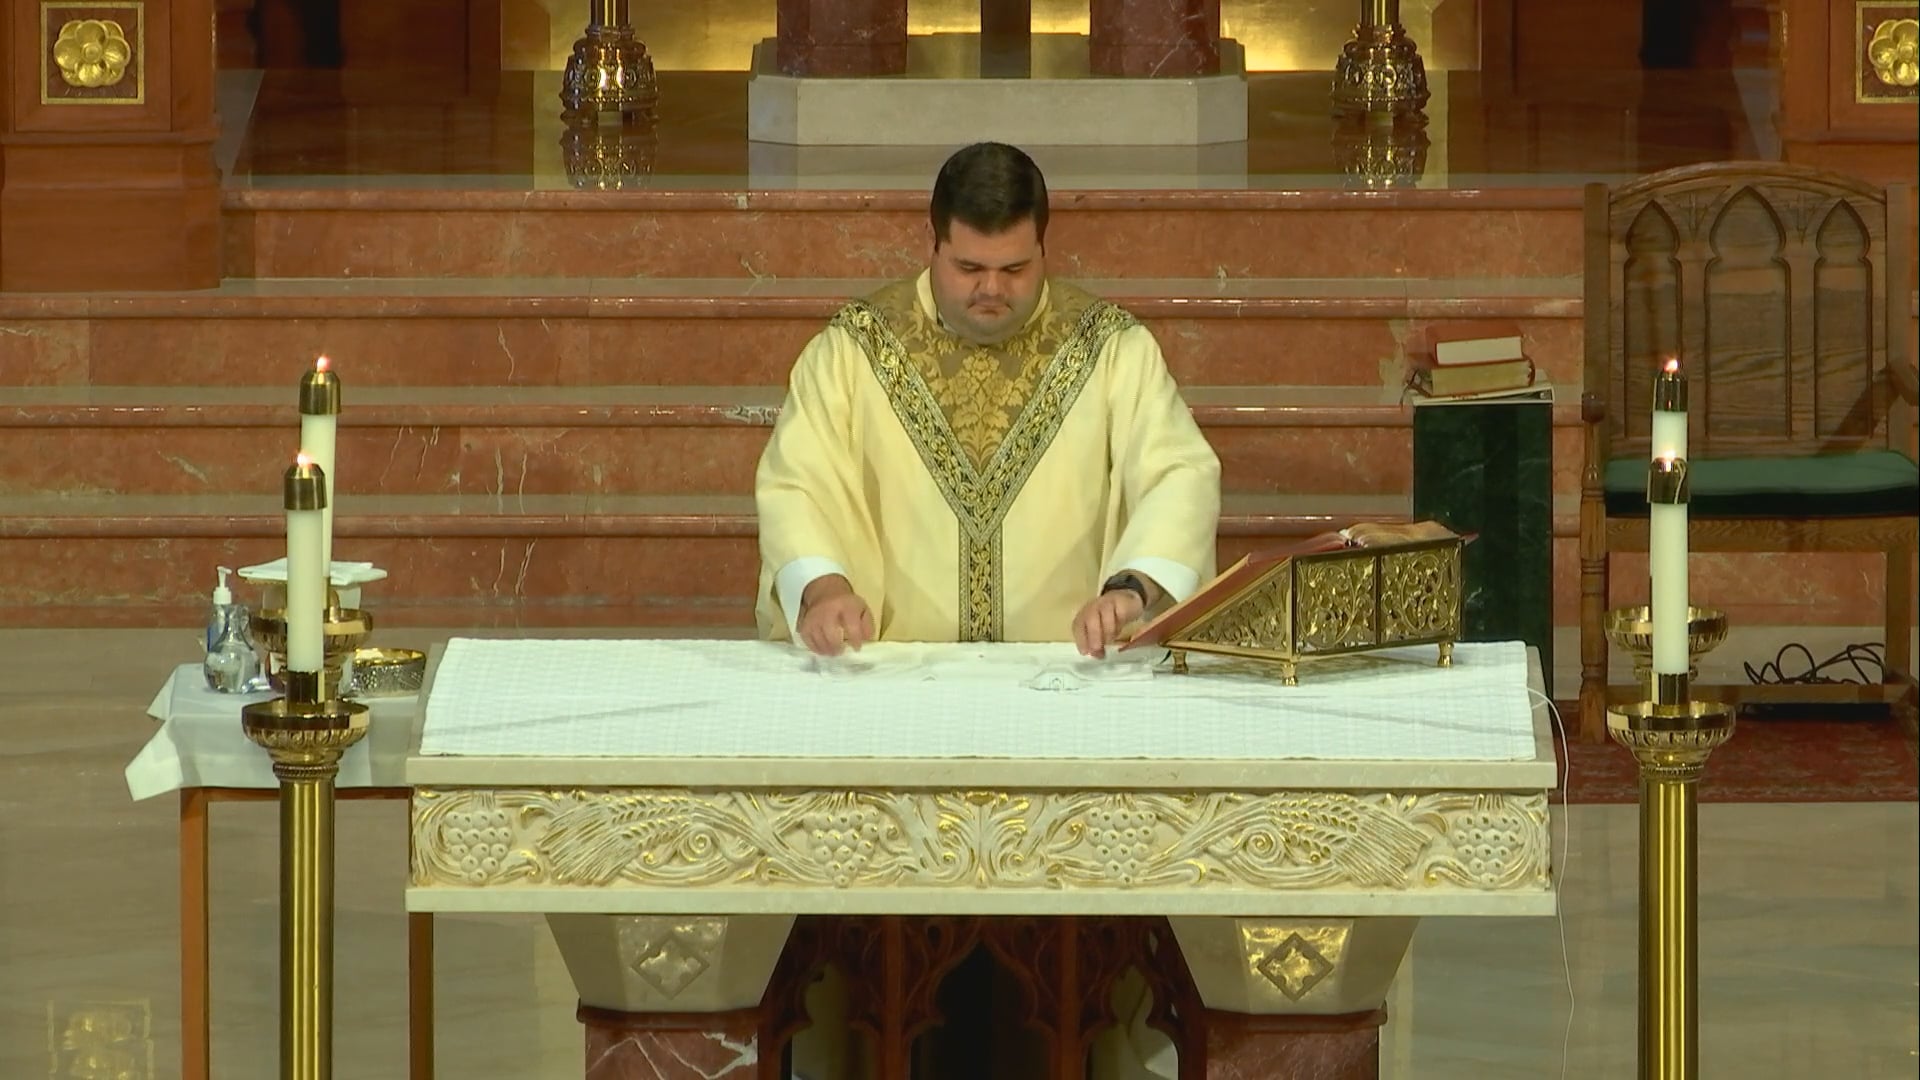 Mass from St. Agnes Cathedral - September 30, 2022